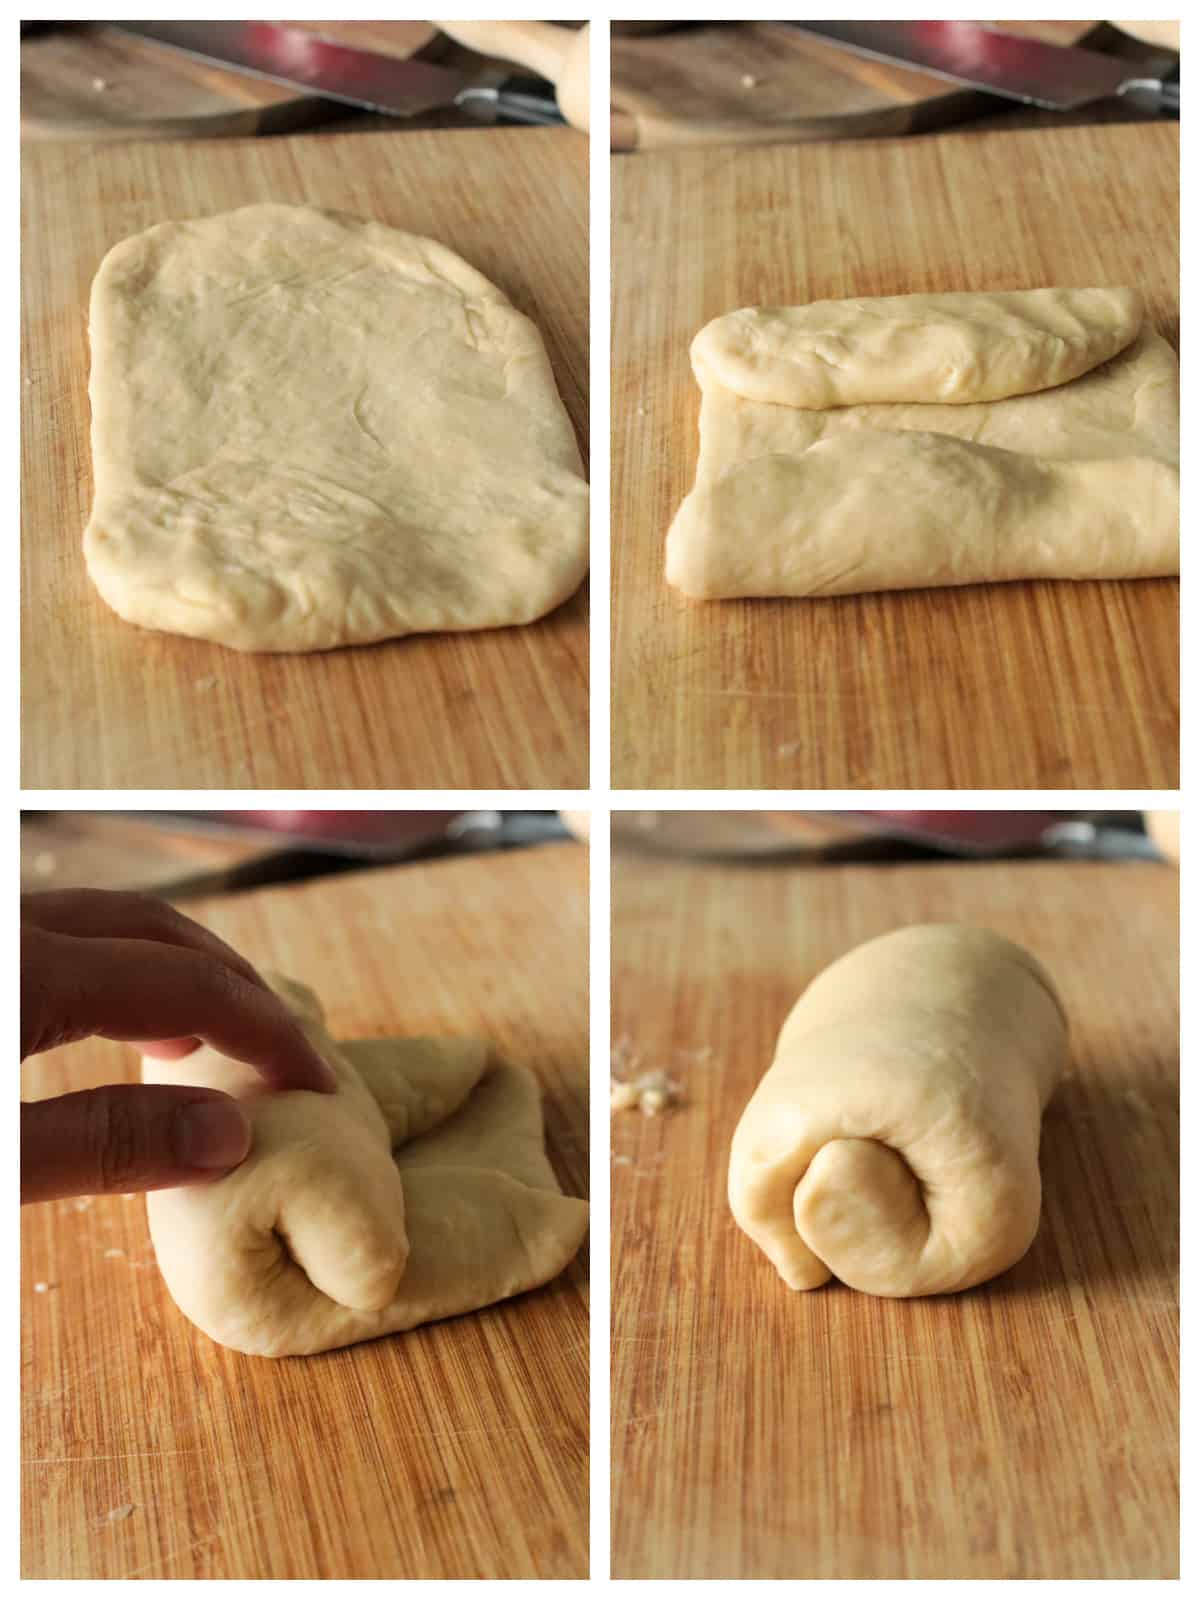 A collage showing the folding process of the dough before putting it in the Pullman loaf pan.